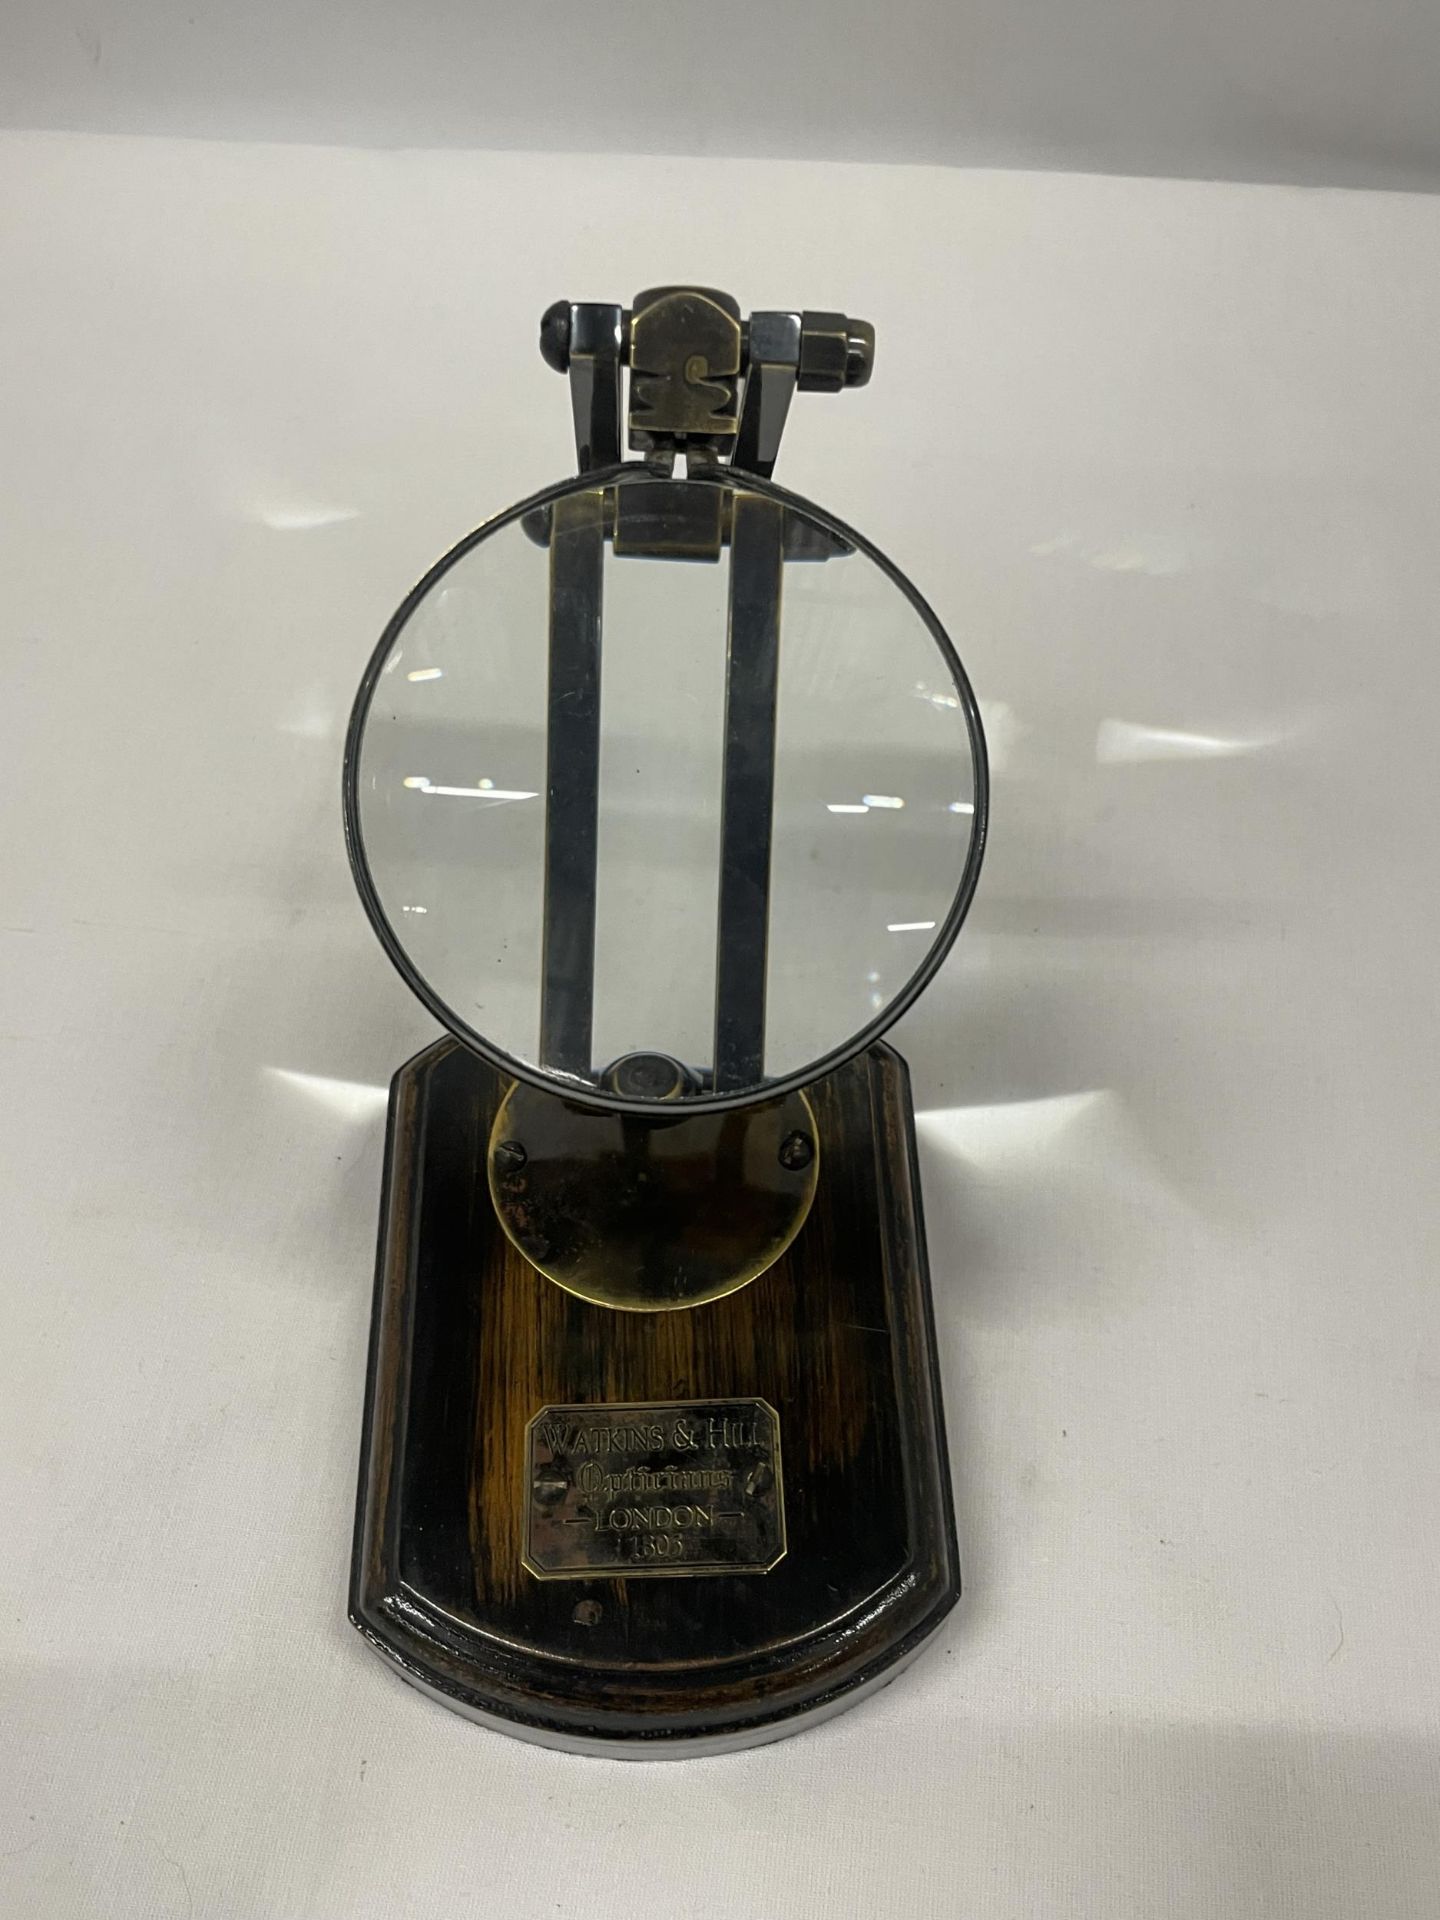 A WATKINS AND HILL MAGNIFYING GLASS ON WOODEN BASE